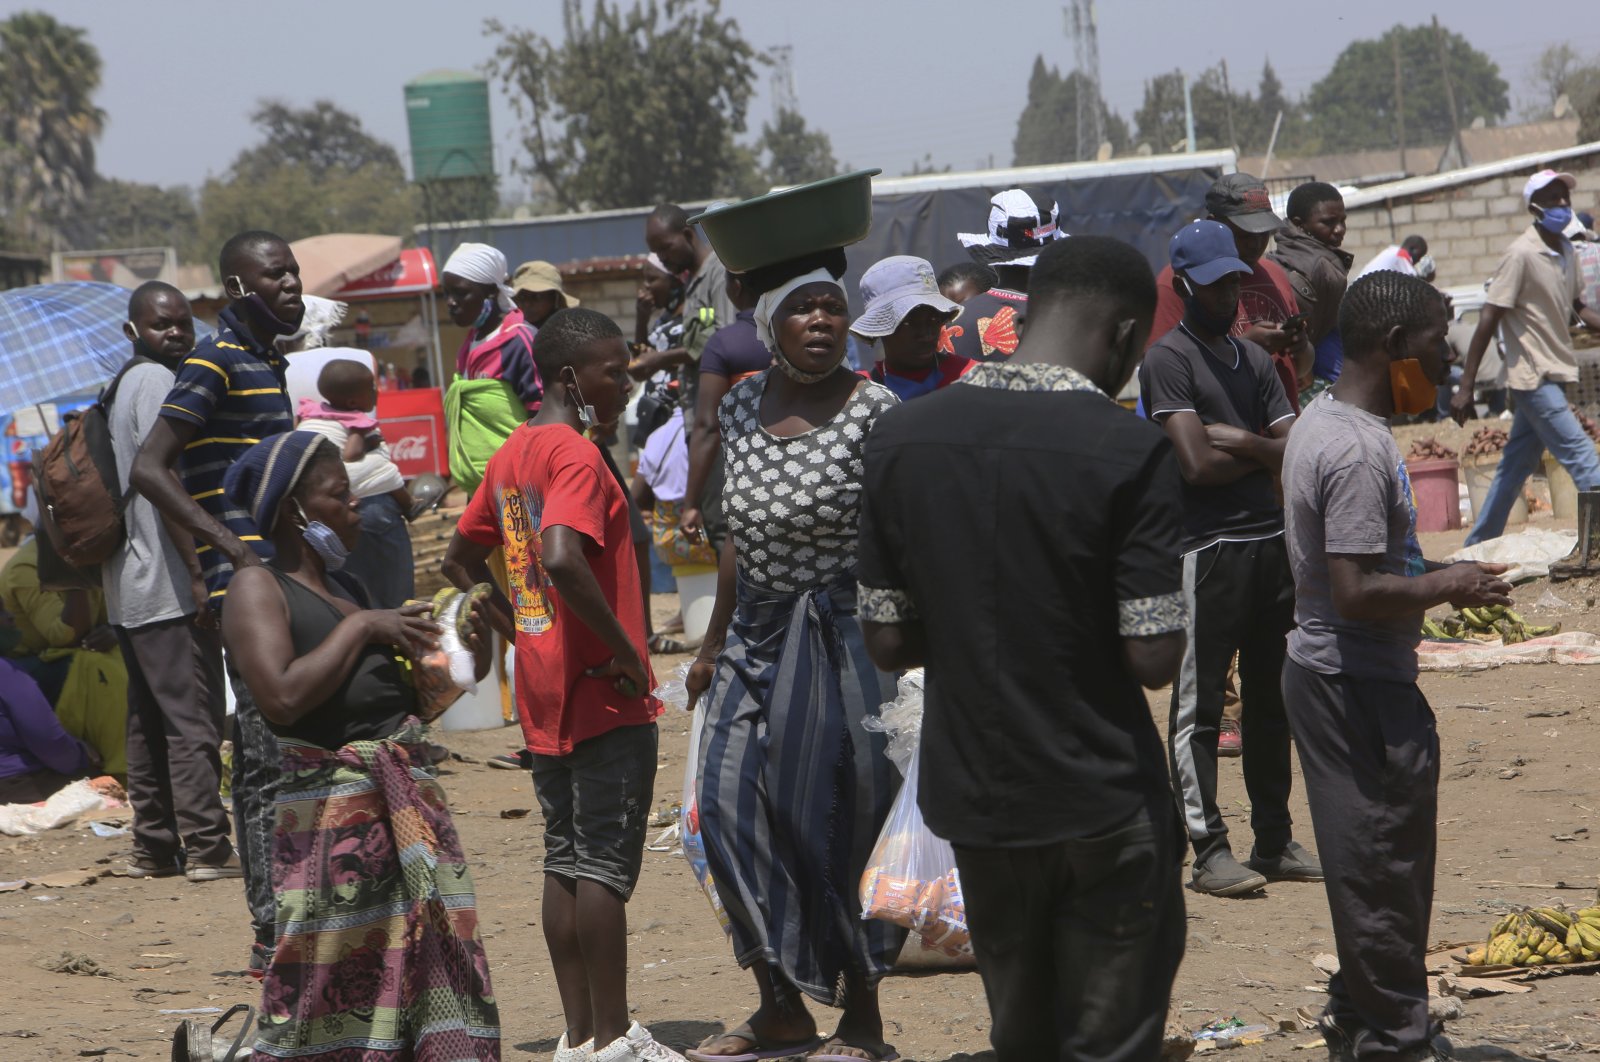 People are seen at a busy market in a poor township on the outskirts of the capital Harare, Zimbabwe, Nov. 15, 2021. (AP Photo)